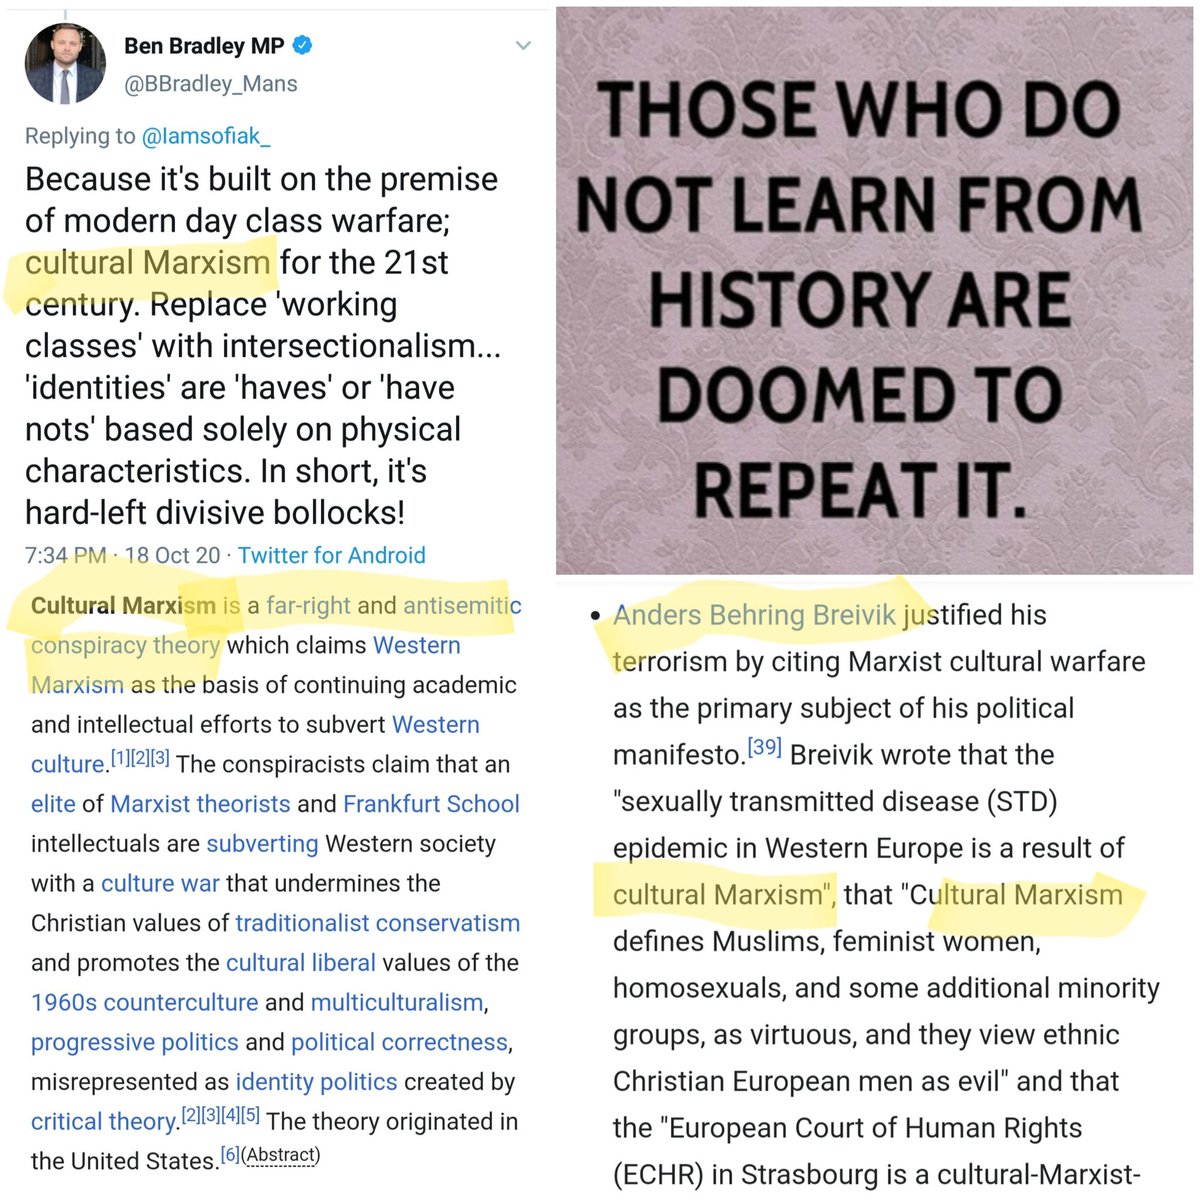 Furthermore, Attorney General Suella Braverman, Tory MP Ben Bradley, & the large group of Tories known as "The Common Sense Group", have all used the antisemitic conspiracy theory of "cultural Marxism" - which inspired far-right terrorist Anders Breivk - on numerous occasions.